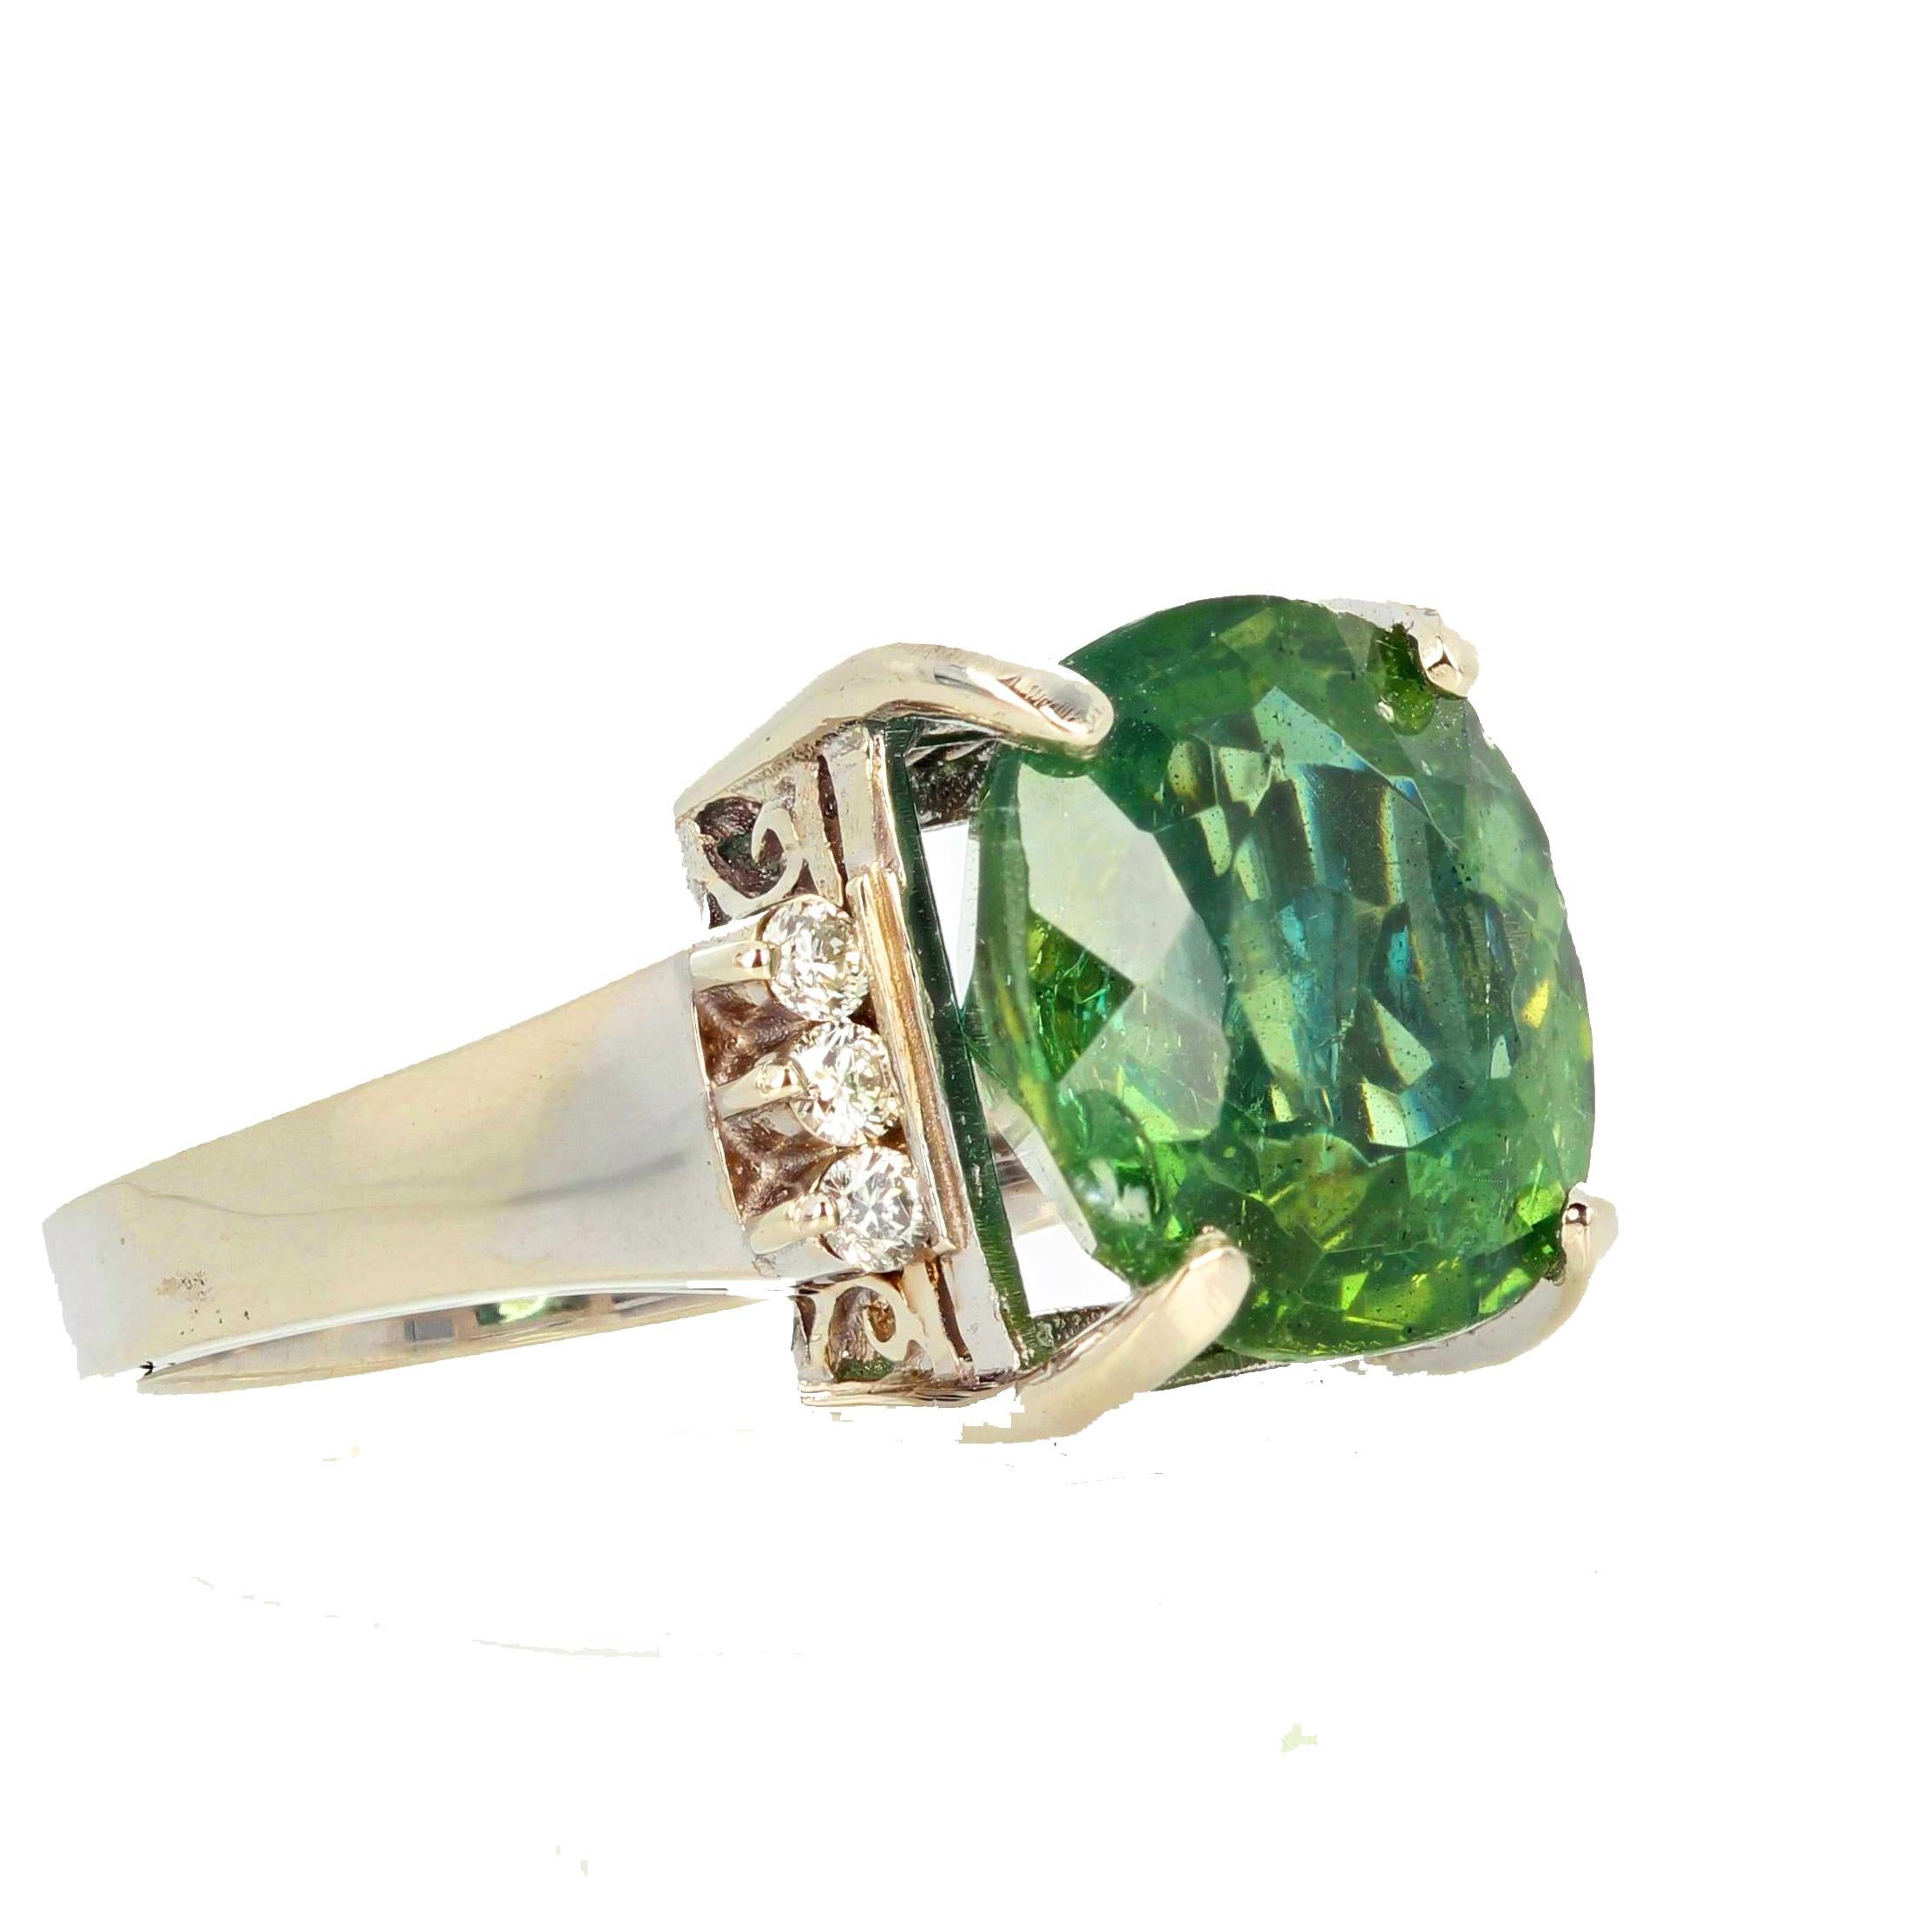 AJD EXTRAORDINARY Glittering Green 8 Carat Madagascar Apatite & Diamonds Ring In New Condition For Sale In Raleigh, NC